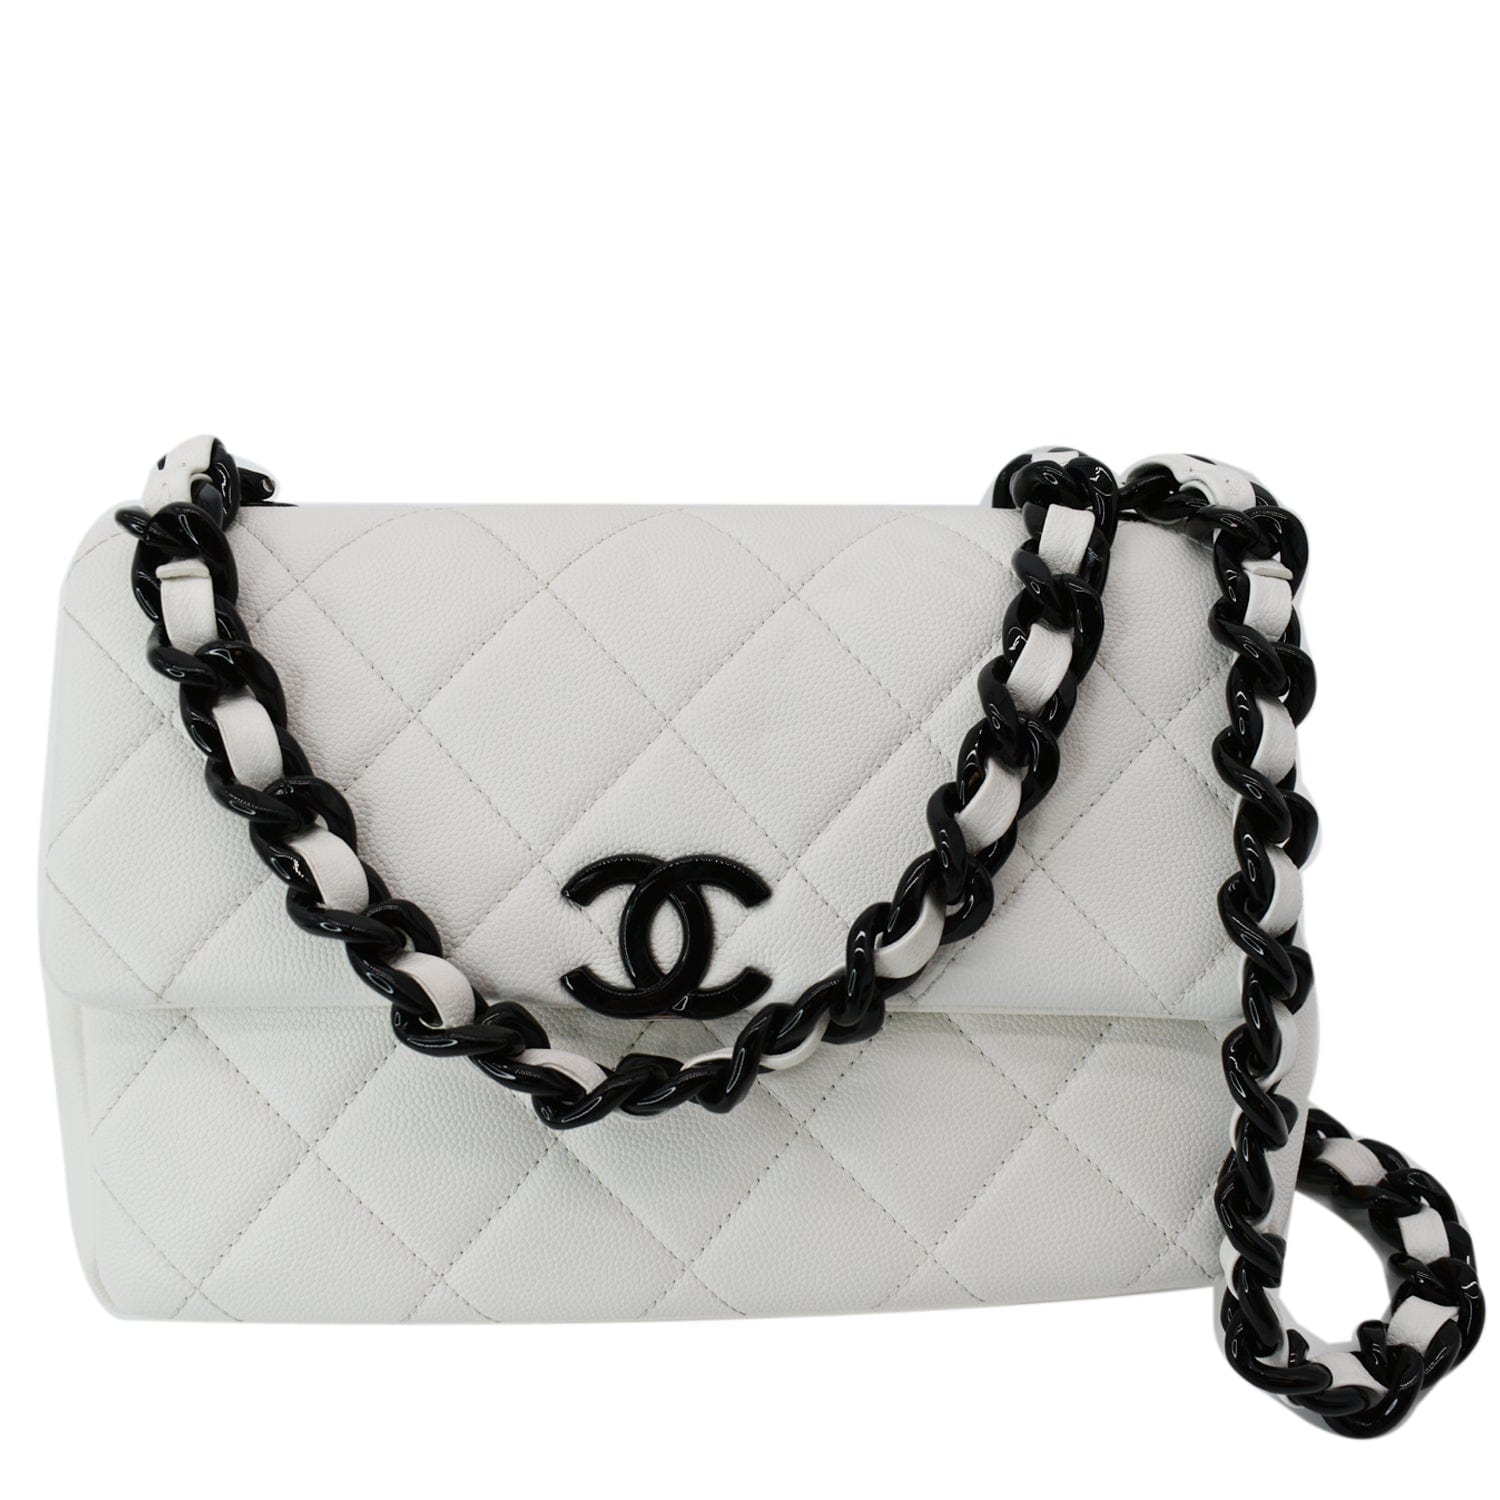 Chanel Off White Quilted Leather Expandable Zip Shoulder Bag